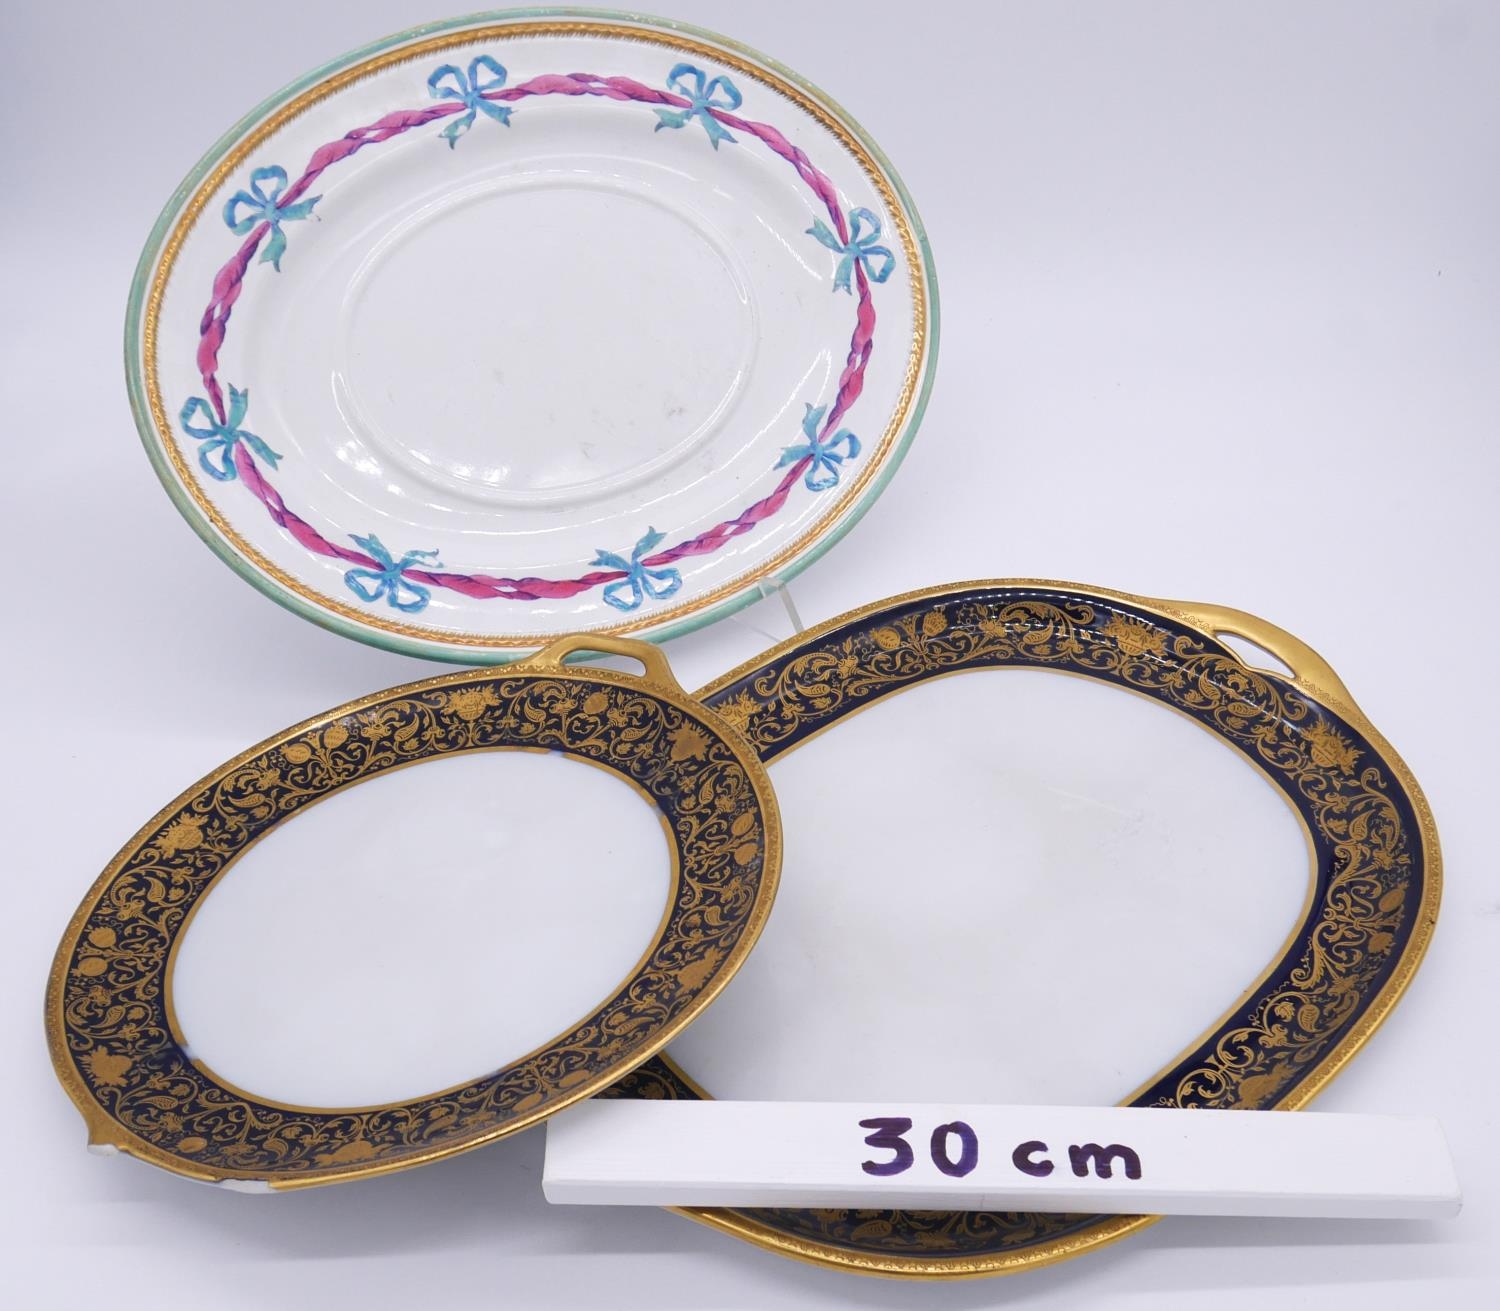 Two Minton porcelain royal blue and gilt stylised foliate design serving platters along with a - Image 9 of 9